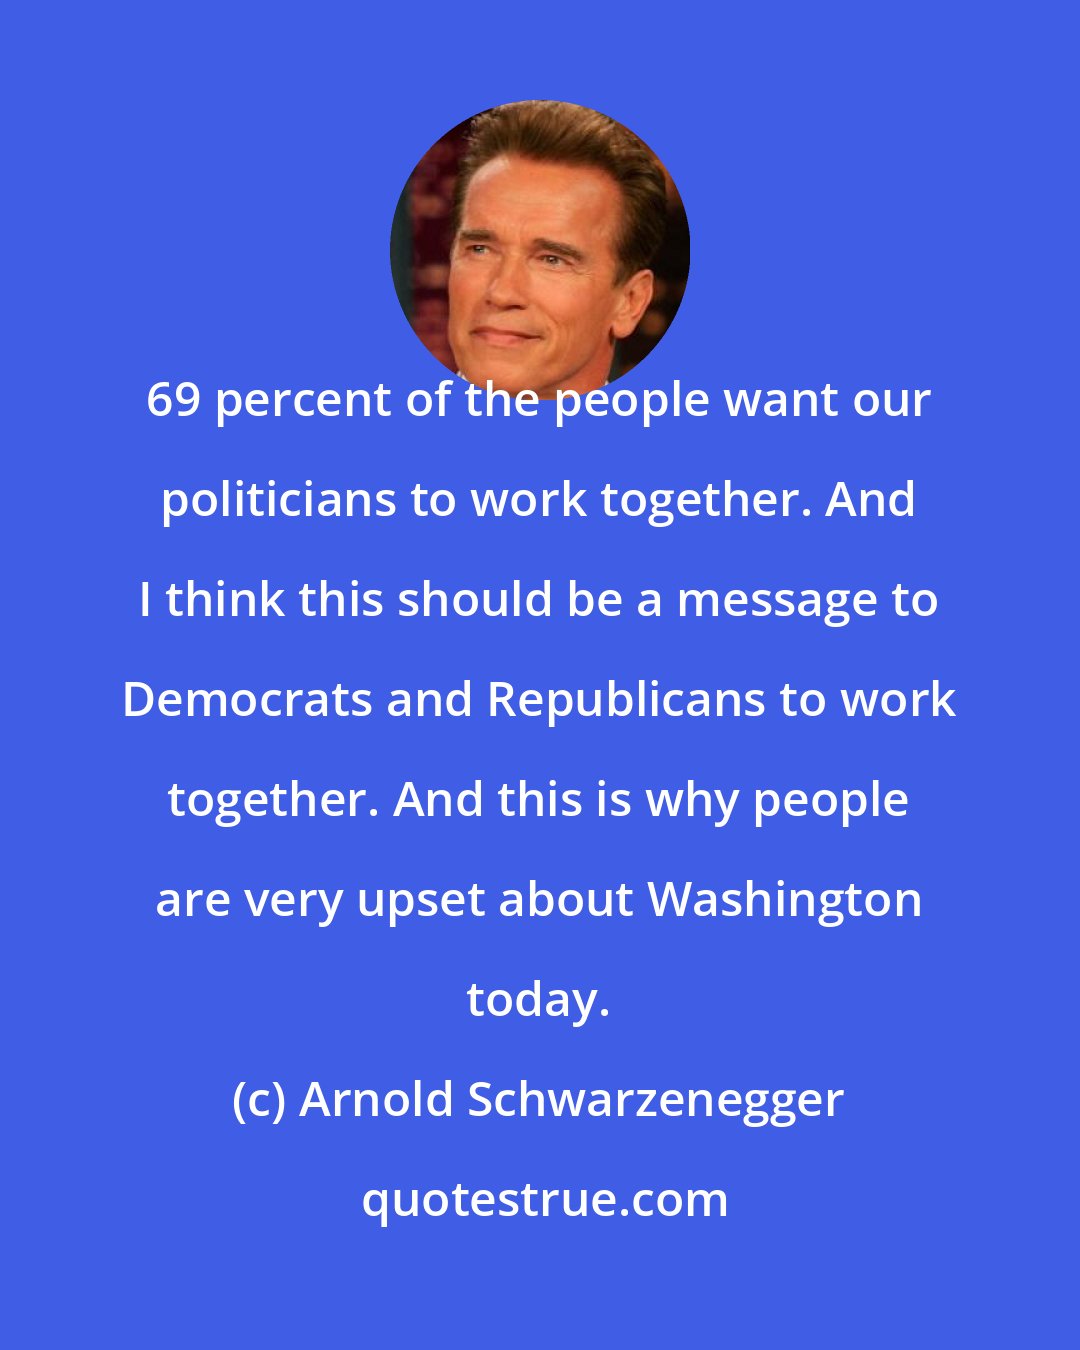 Arnold Schwarzenegger: 69 percent of the people want our politicians to work together. And I think this should be a message to Democrats and Republicans to work together. And this is why people are very upset about Washington today.